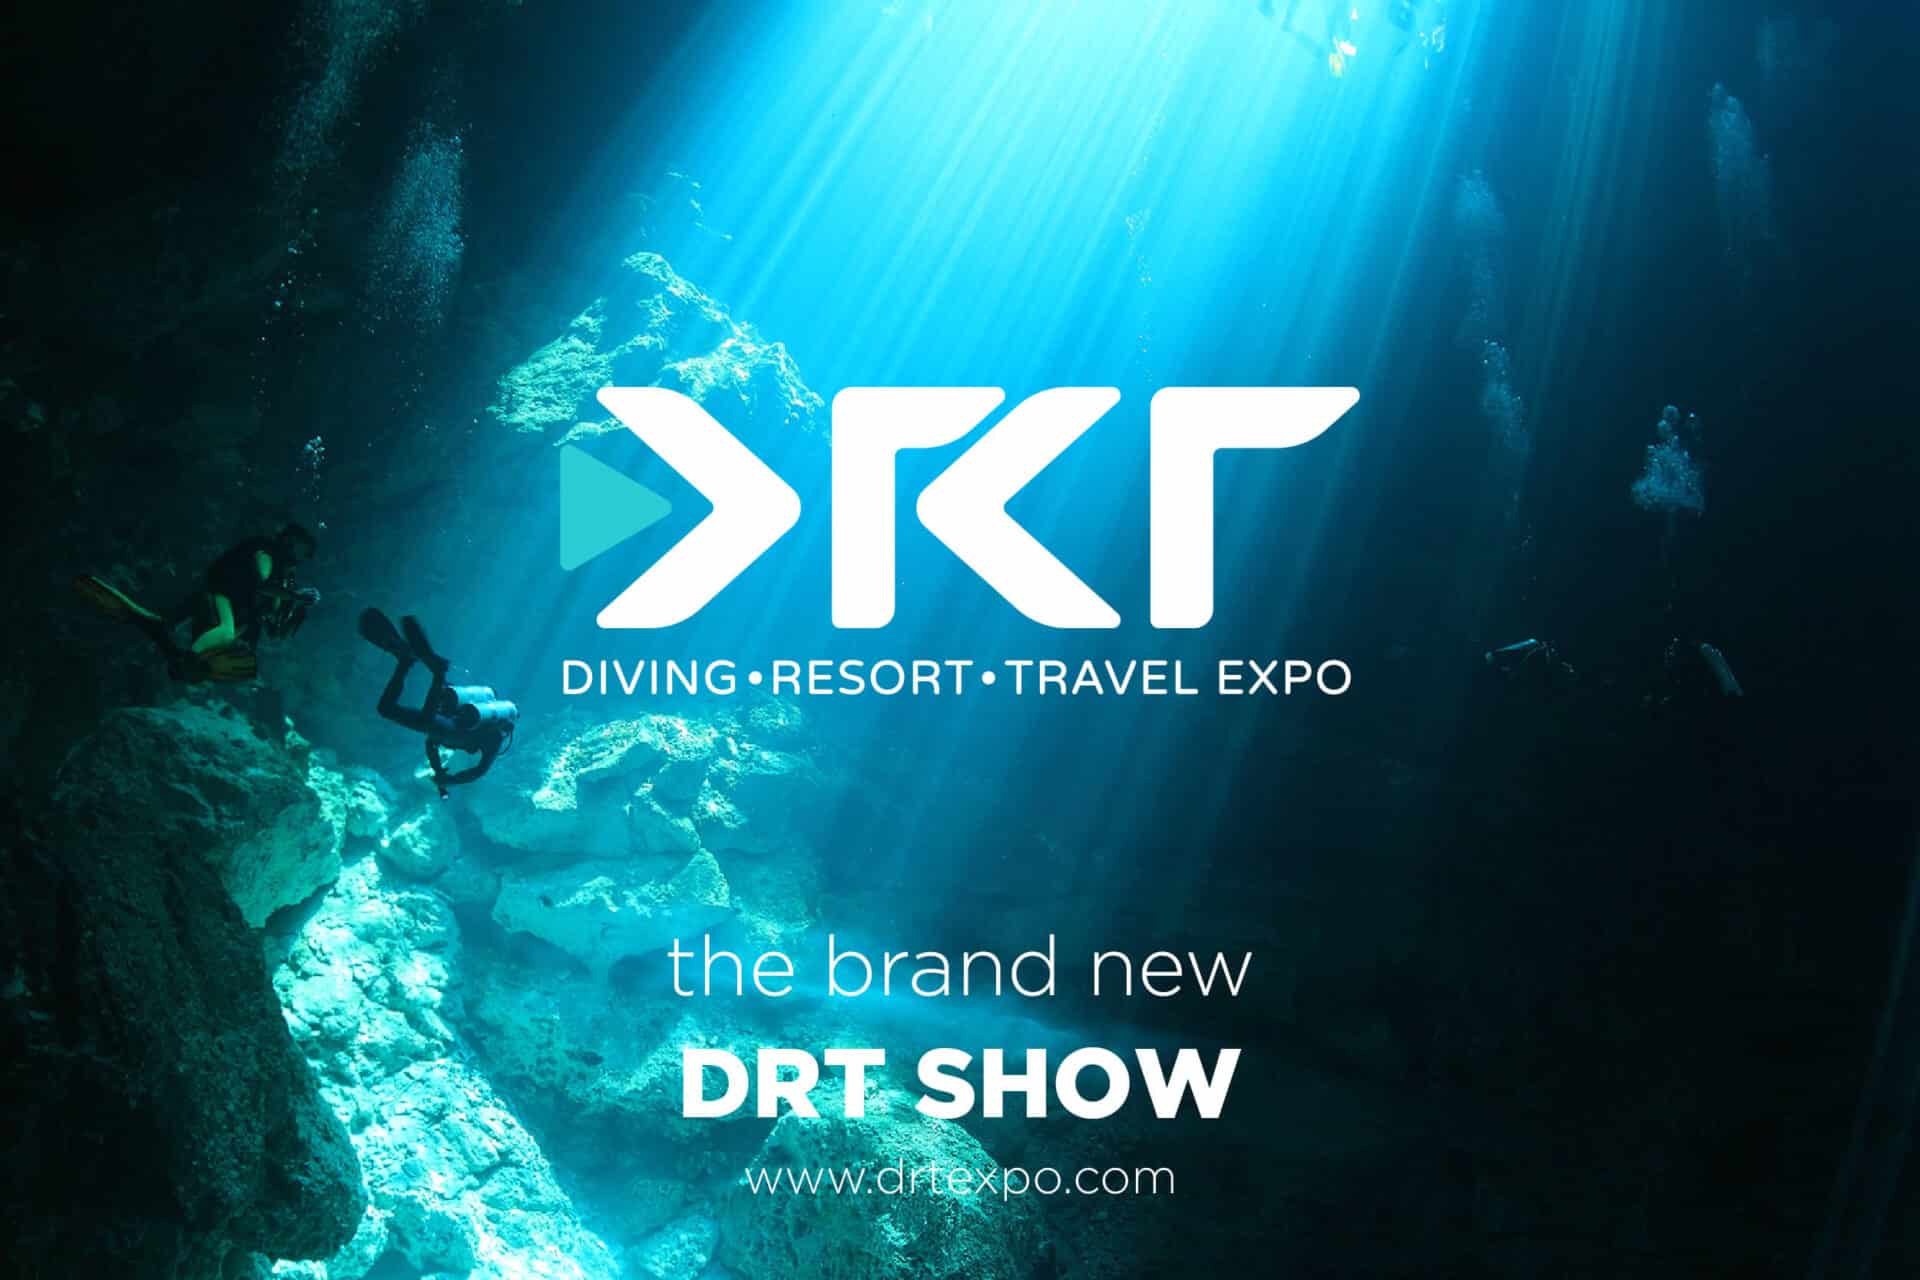 DRT SHOW new logo launch poster 09 The Brand-New DRT SHOW 全新品牌識別正式發布